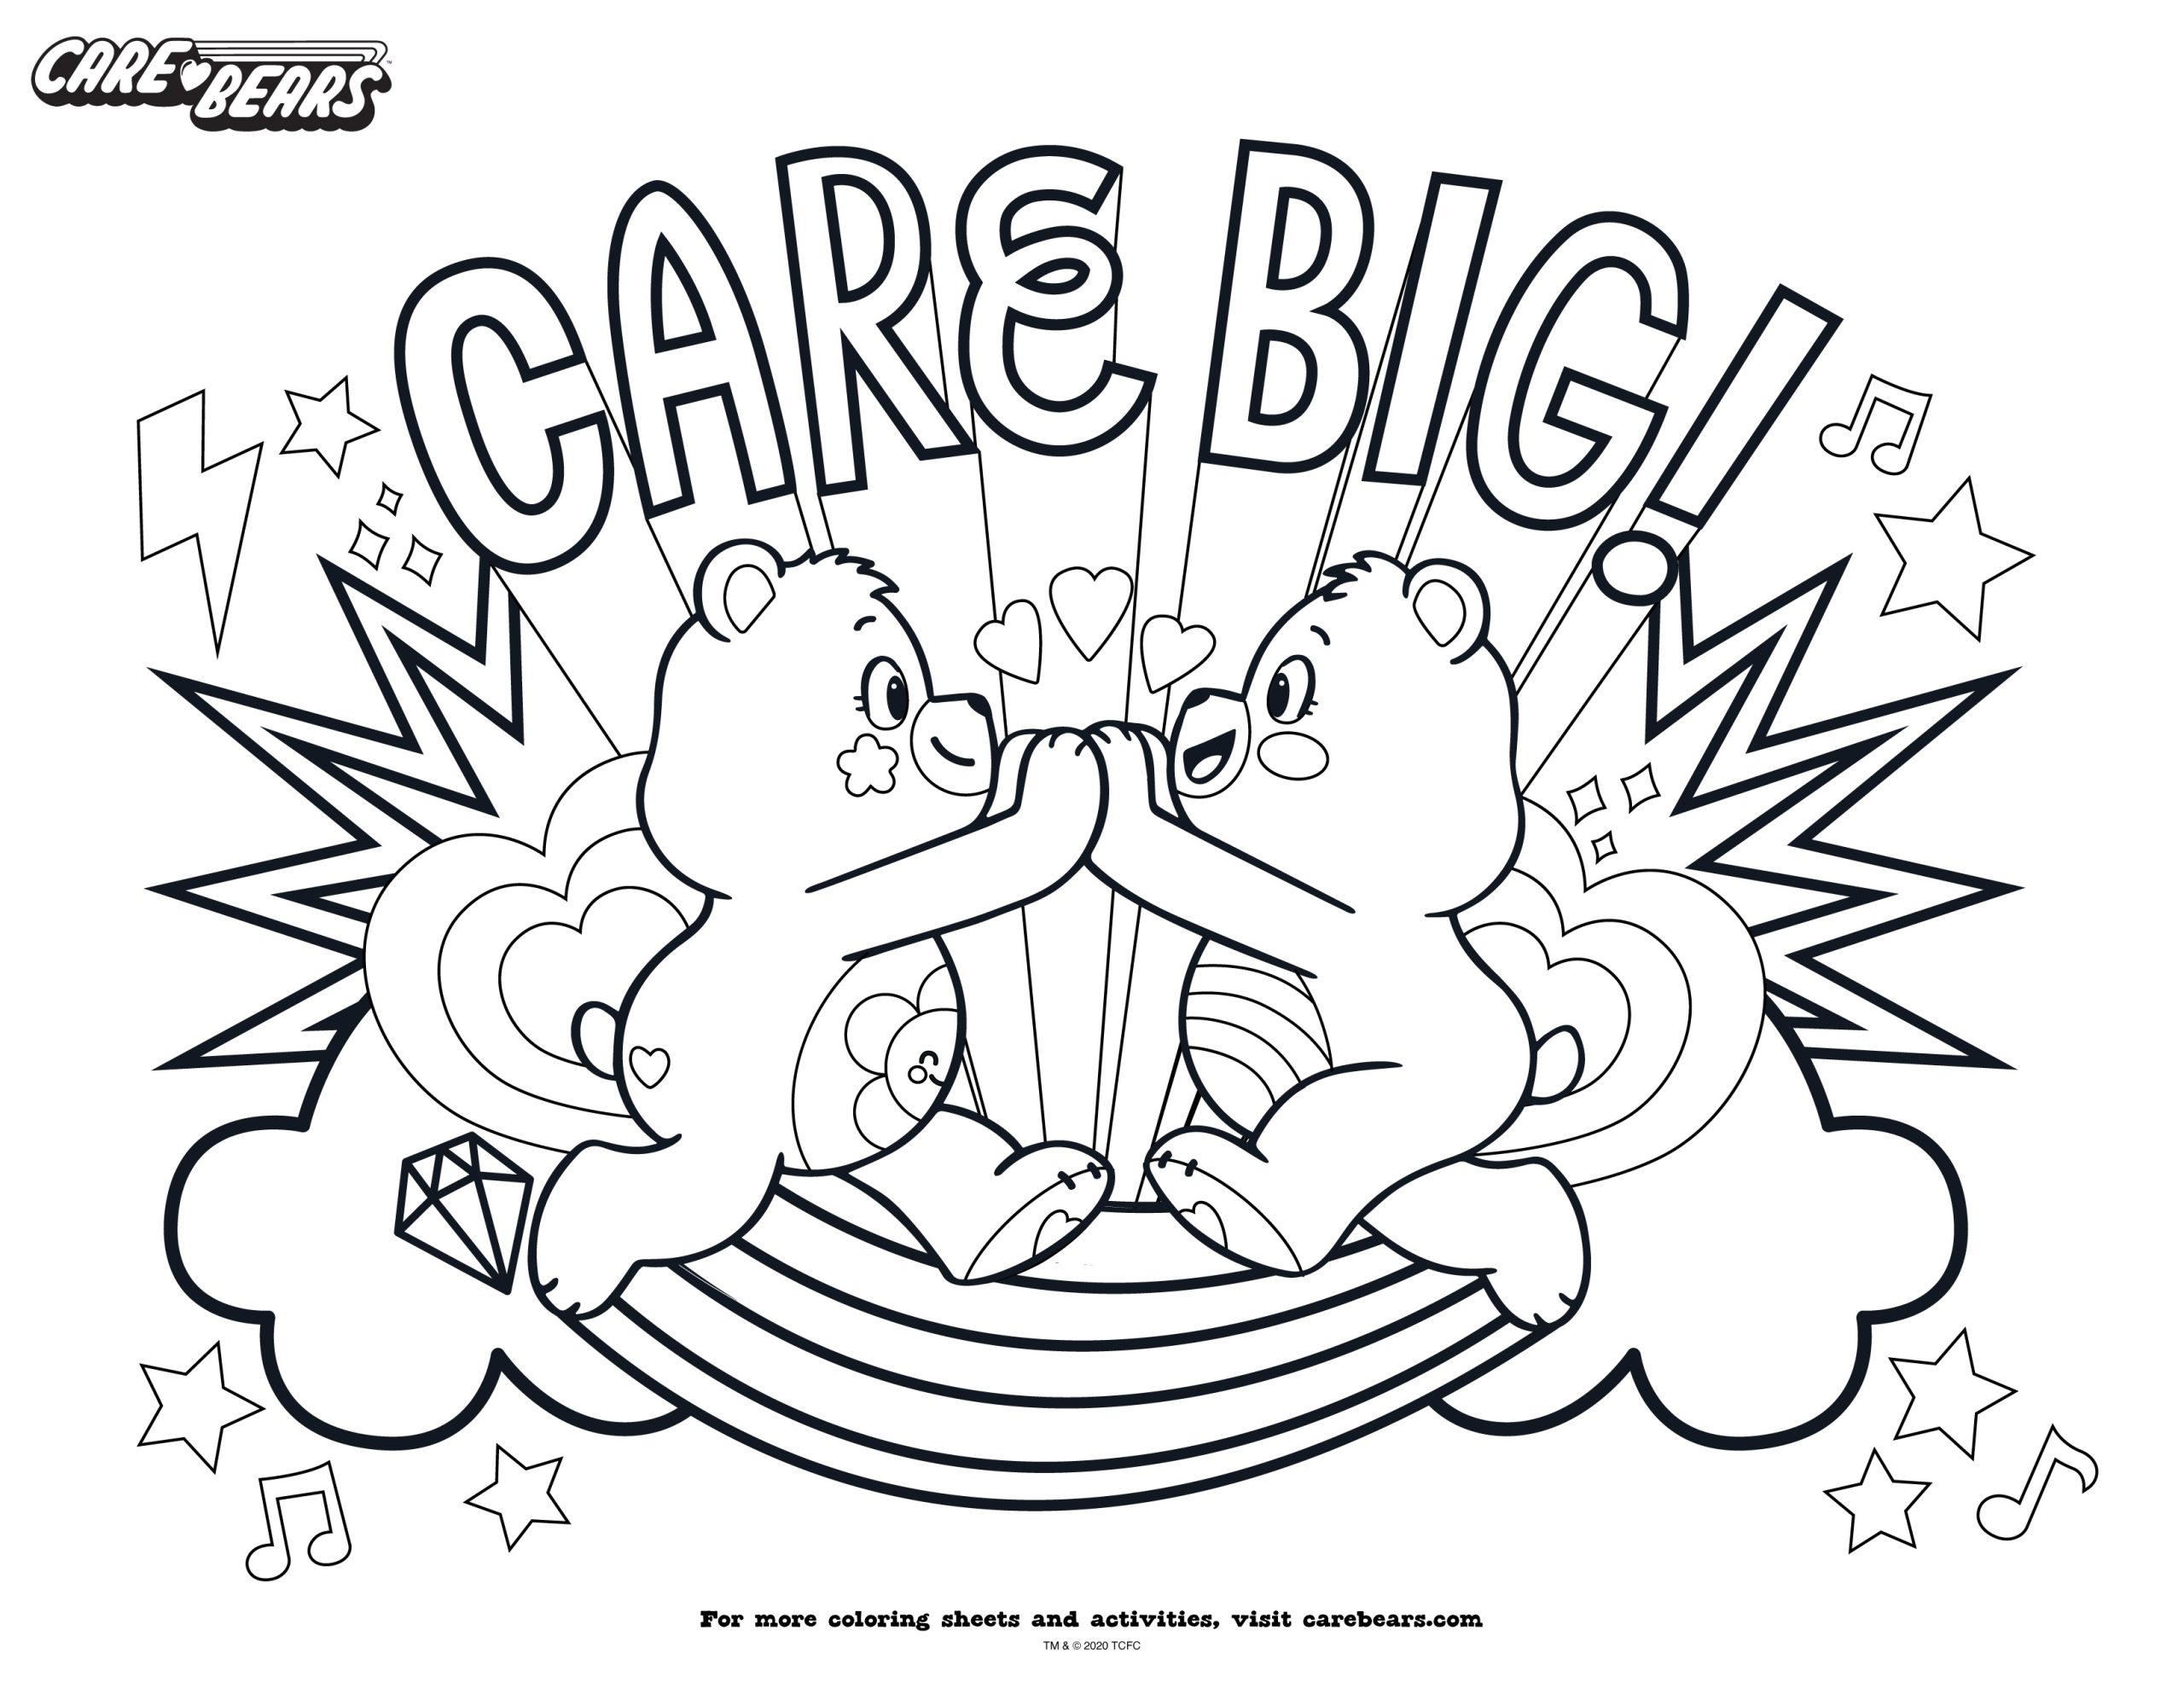 Care Bears | Share your Care Colouring Sheet